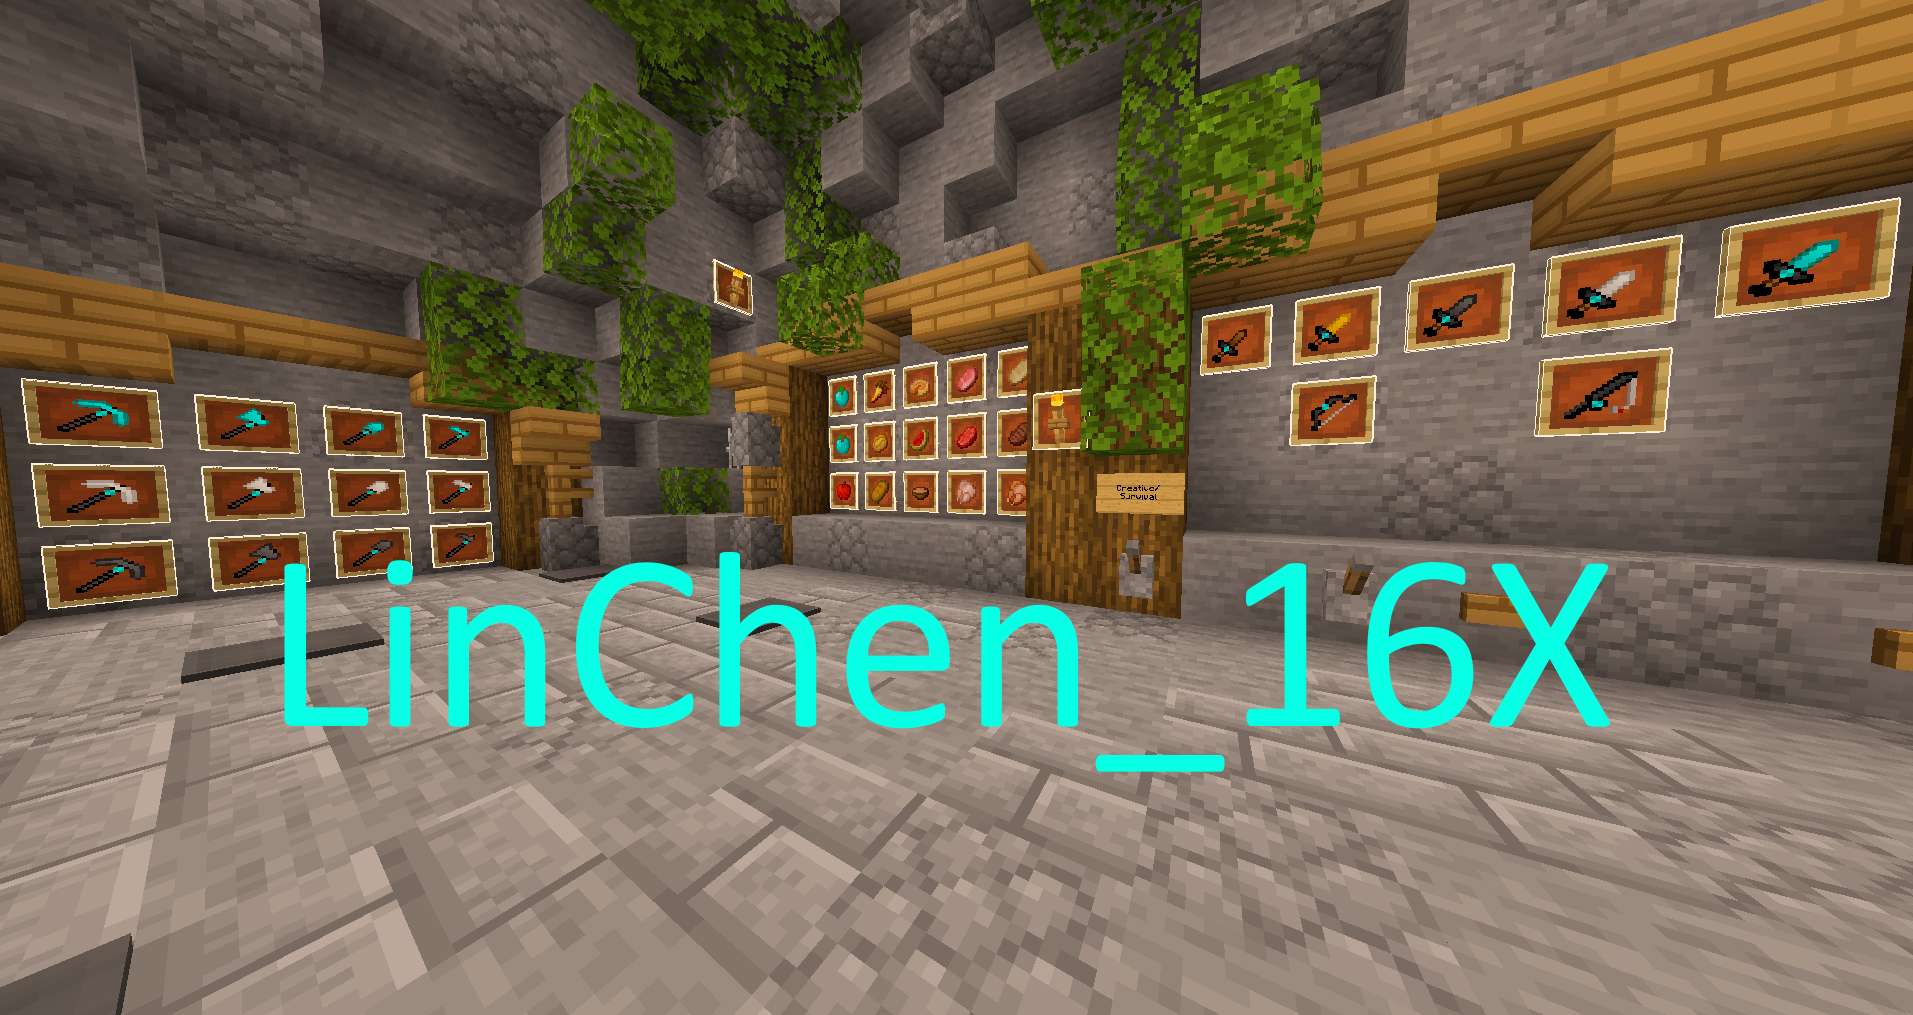 LinChen_16X 16x by Douyao on PvPRP